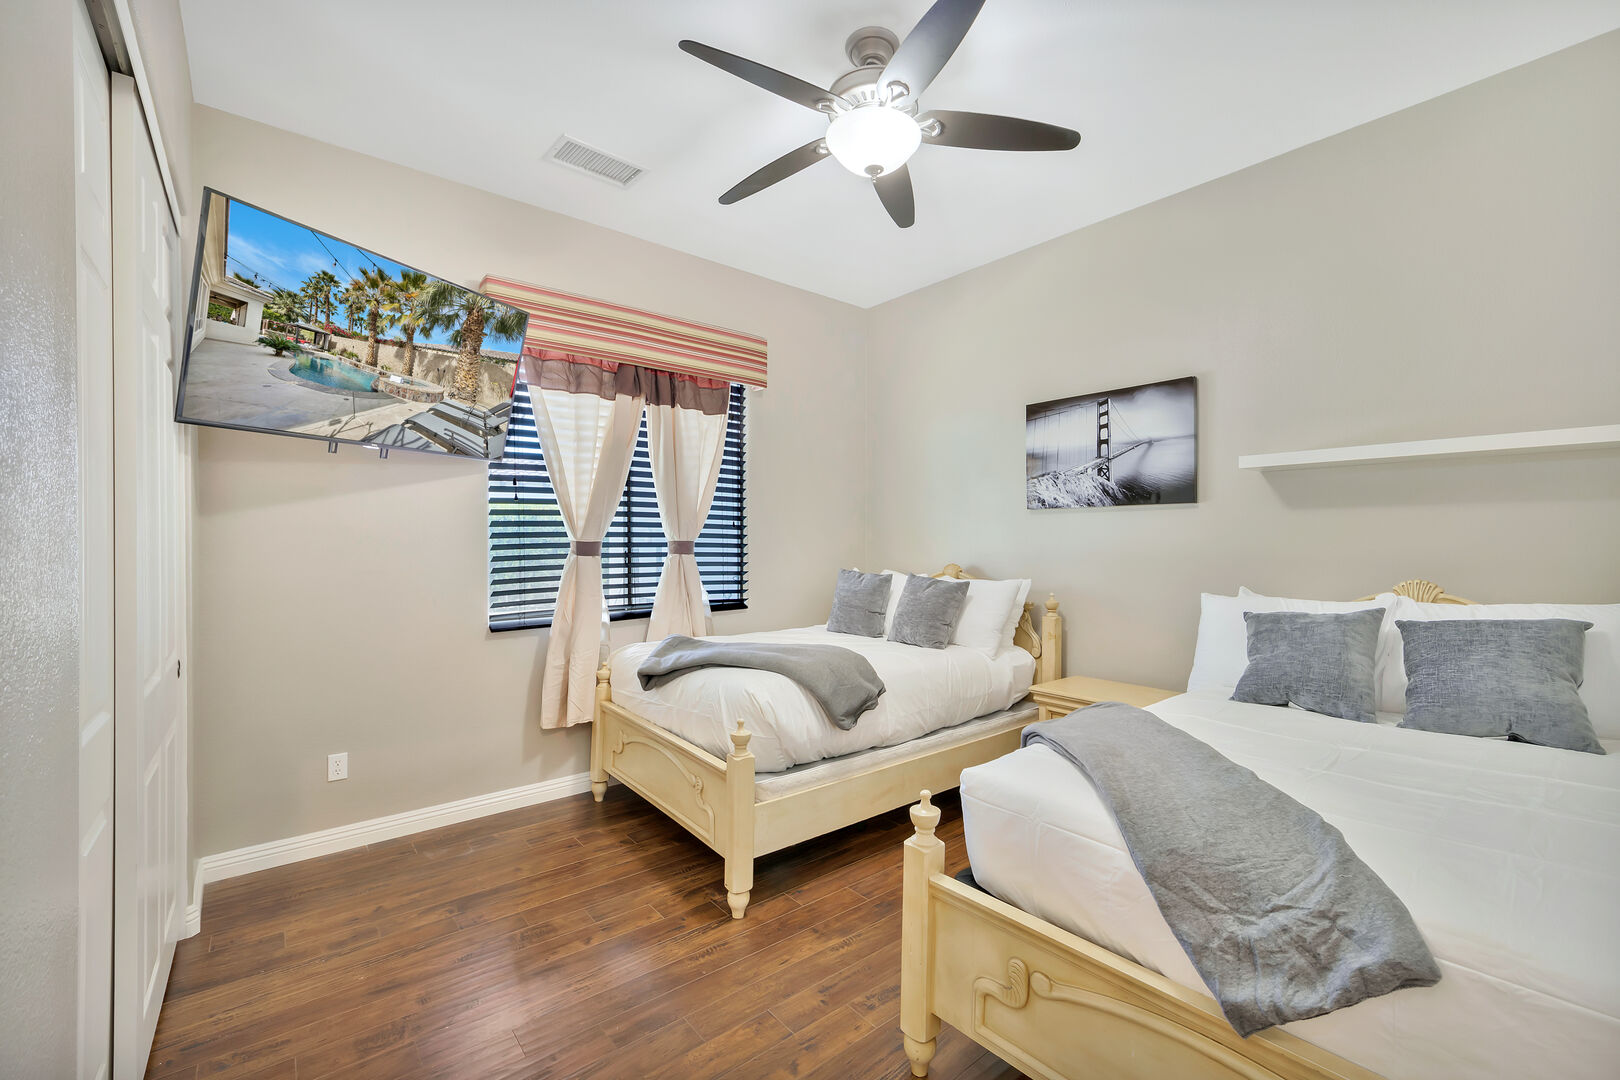 Bedroom 5, located next to the  Laundry Room features two Full-sized beds, 55-inch TCL Smart Television, and ceiling fan. Movie night anyone?